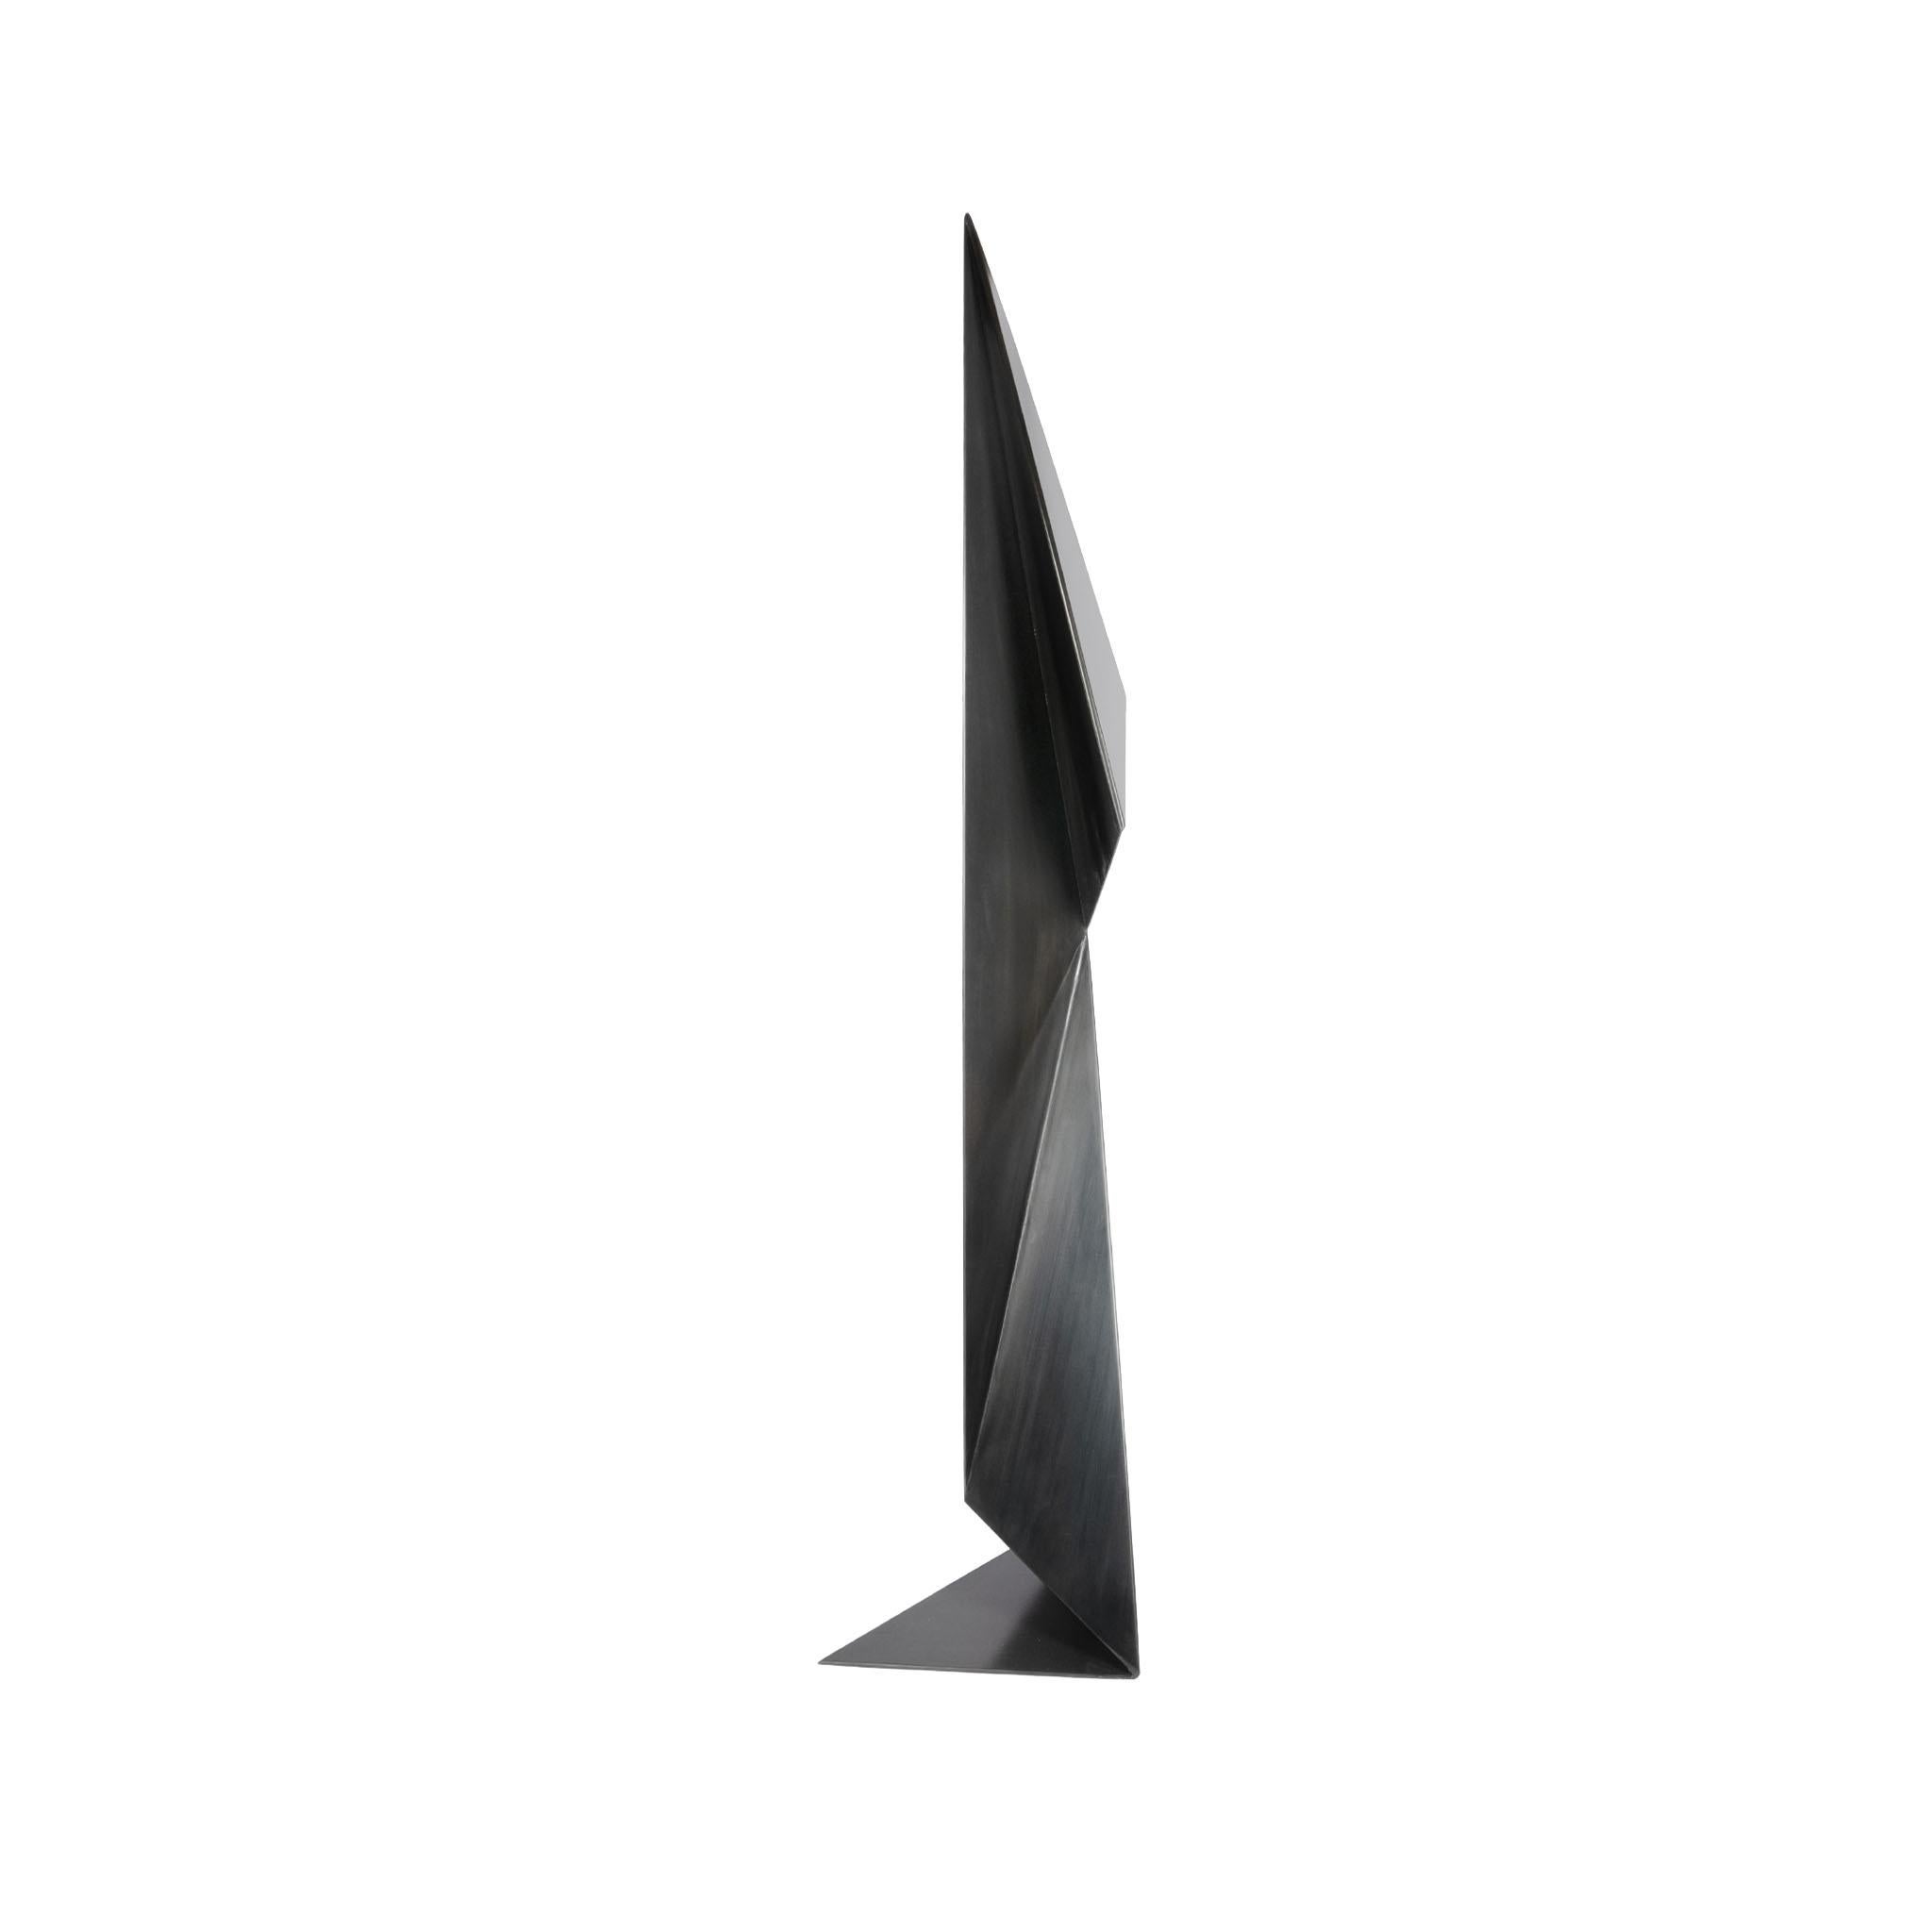 tall abstract sculpture